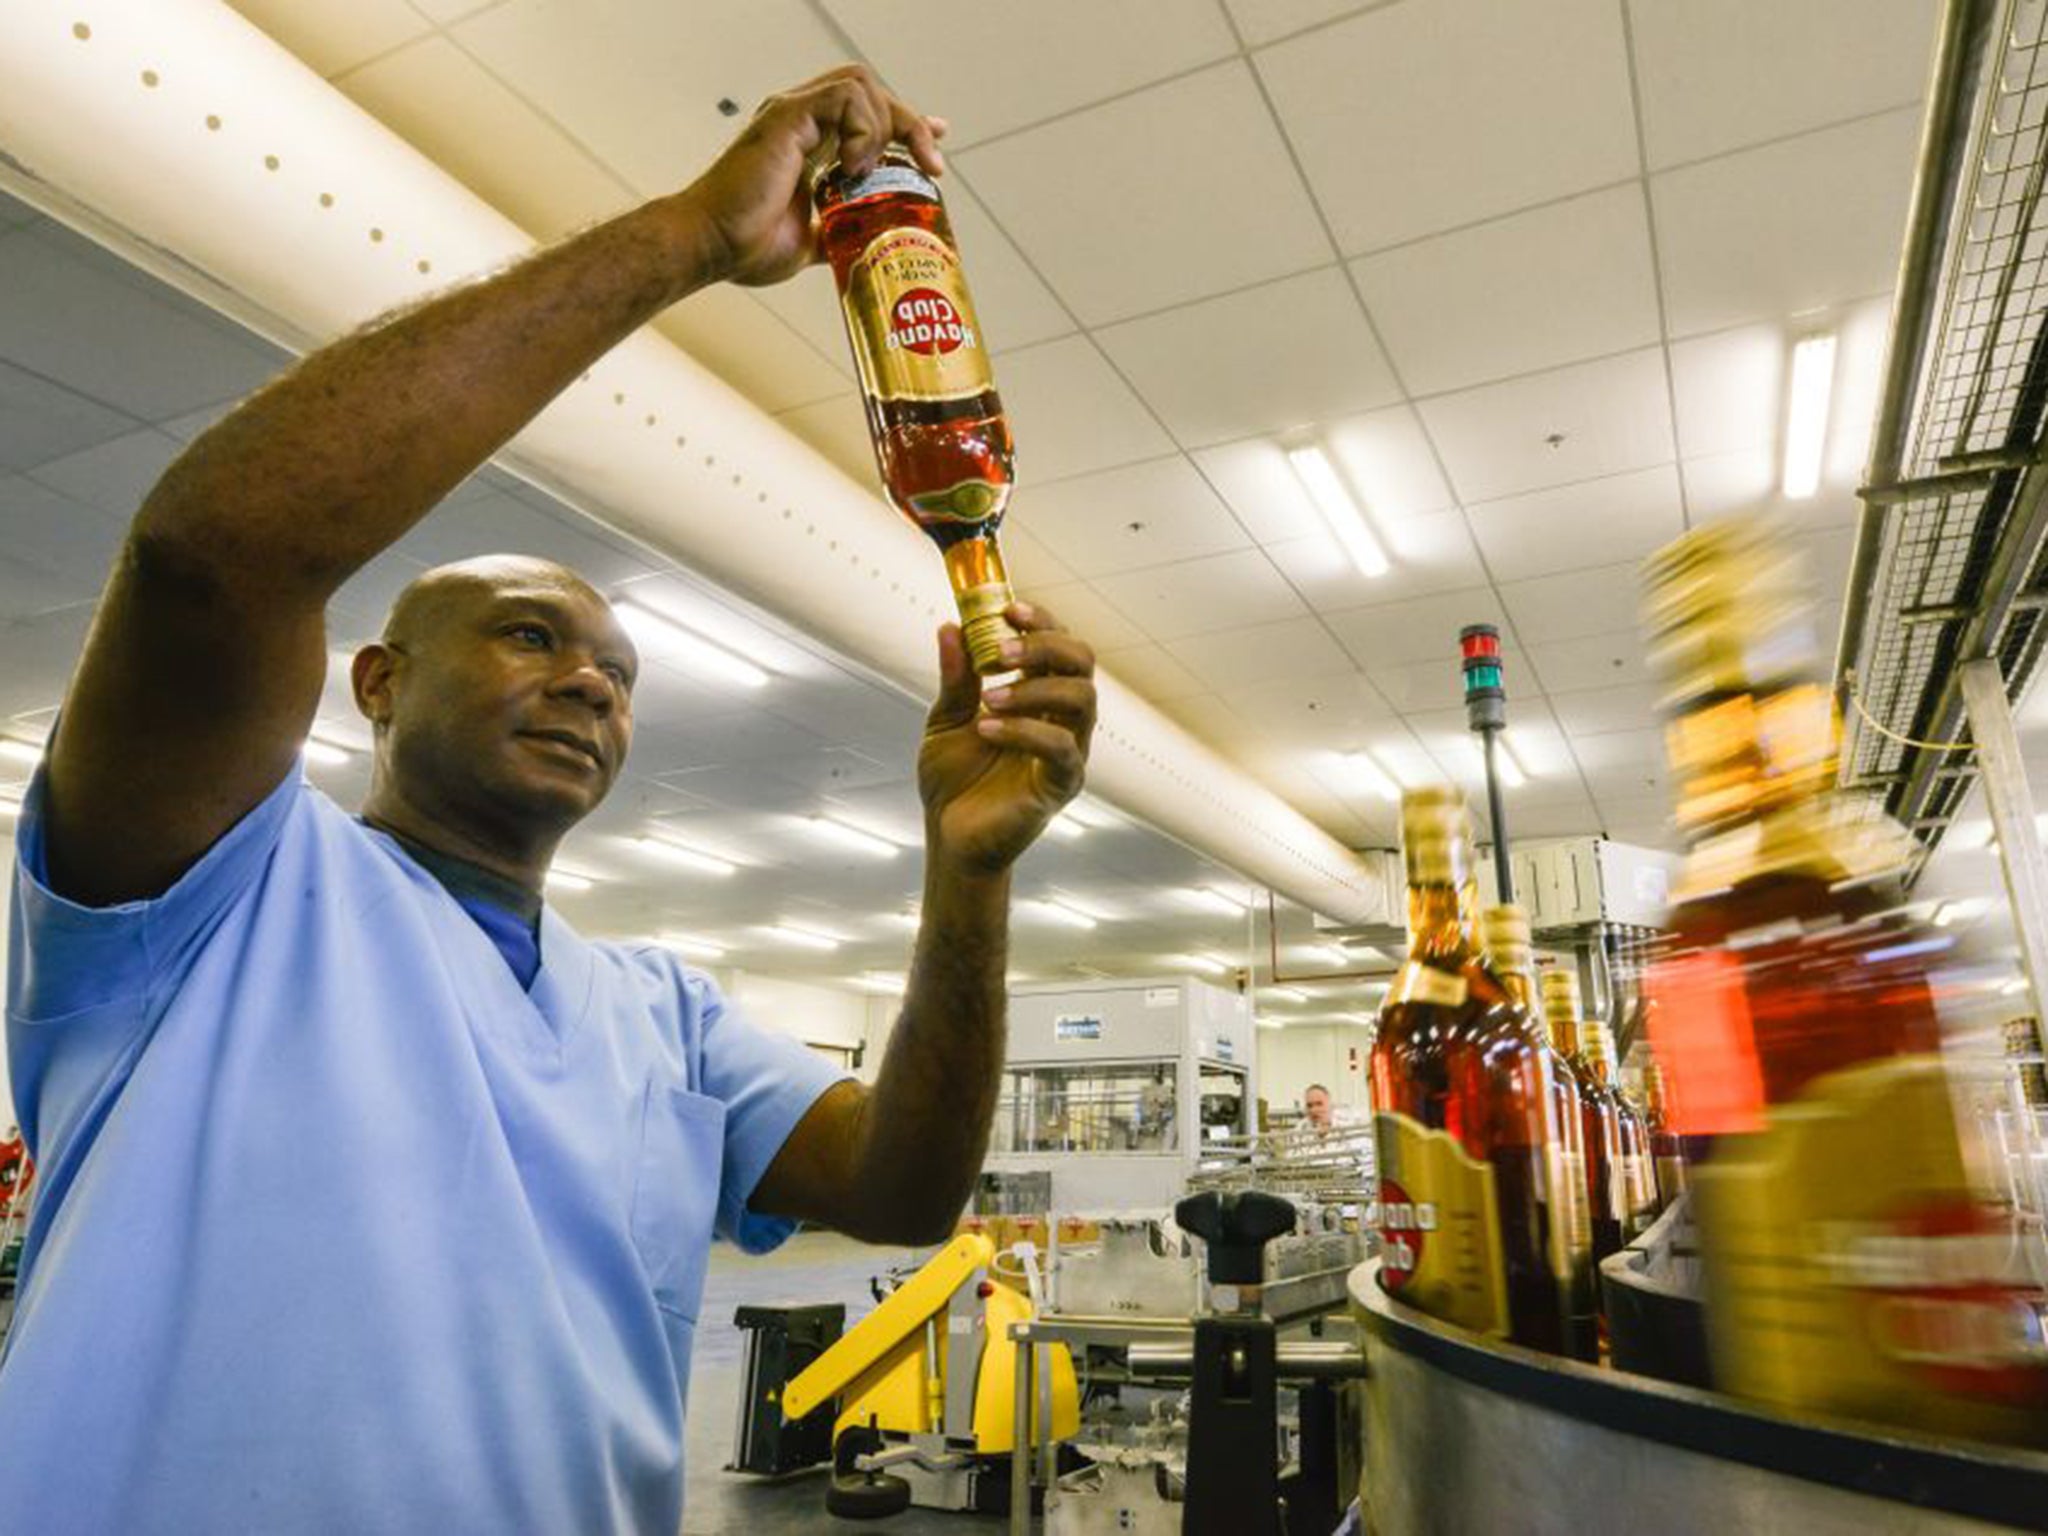 Cuban Havana Club factory, a joint operation between the government and Pernod